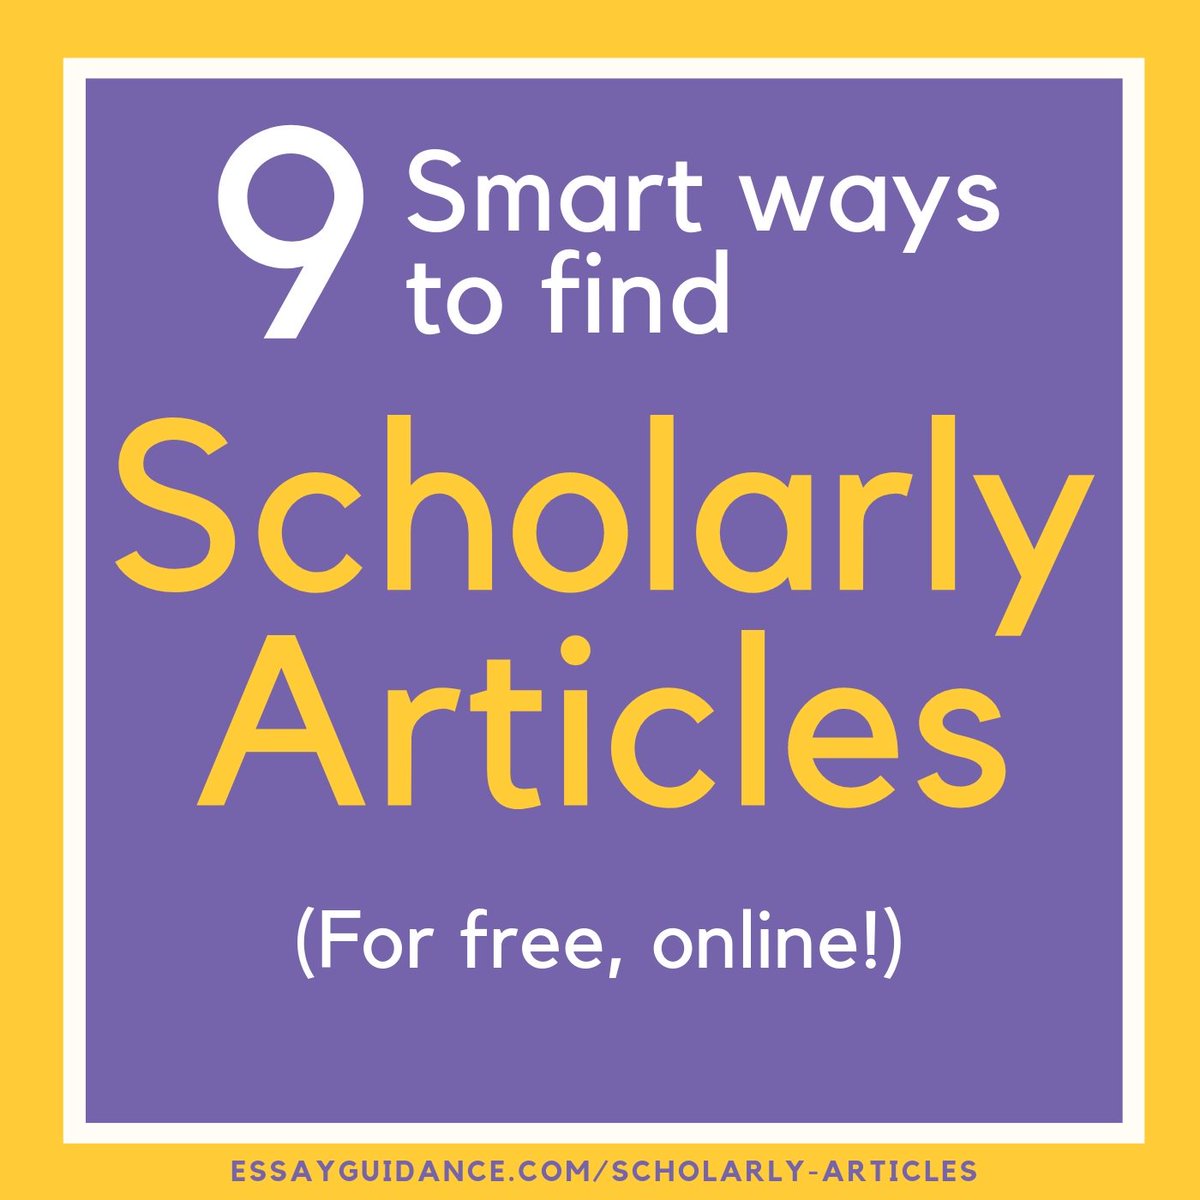 Need to find scholarly sources for your essay? Here's where to find them free, fast and online: essayguidance.com/scholarly-arti… #essaywriting #referencing #APA #studying #studentlife #exams #essay essayguidance.com/scholarly-arti…